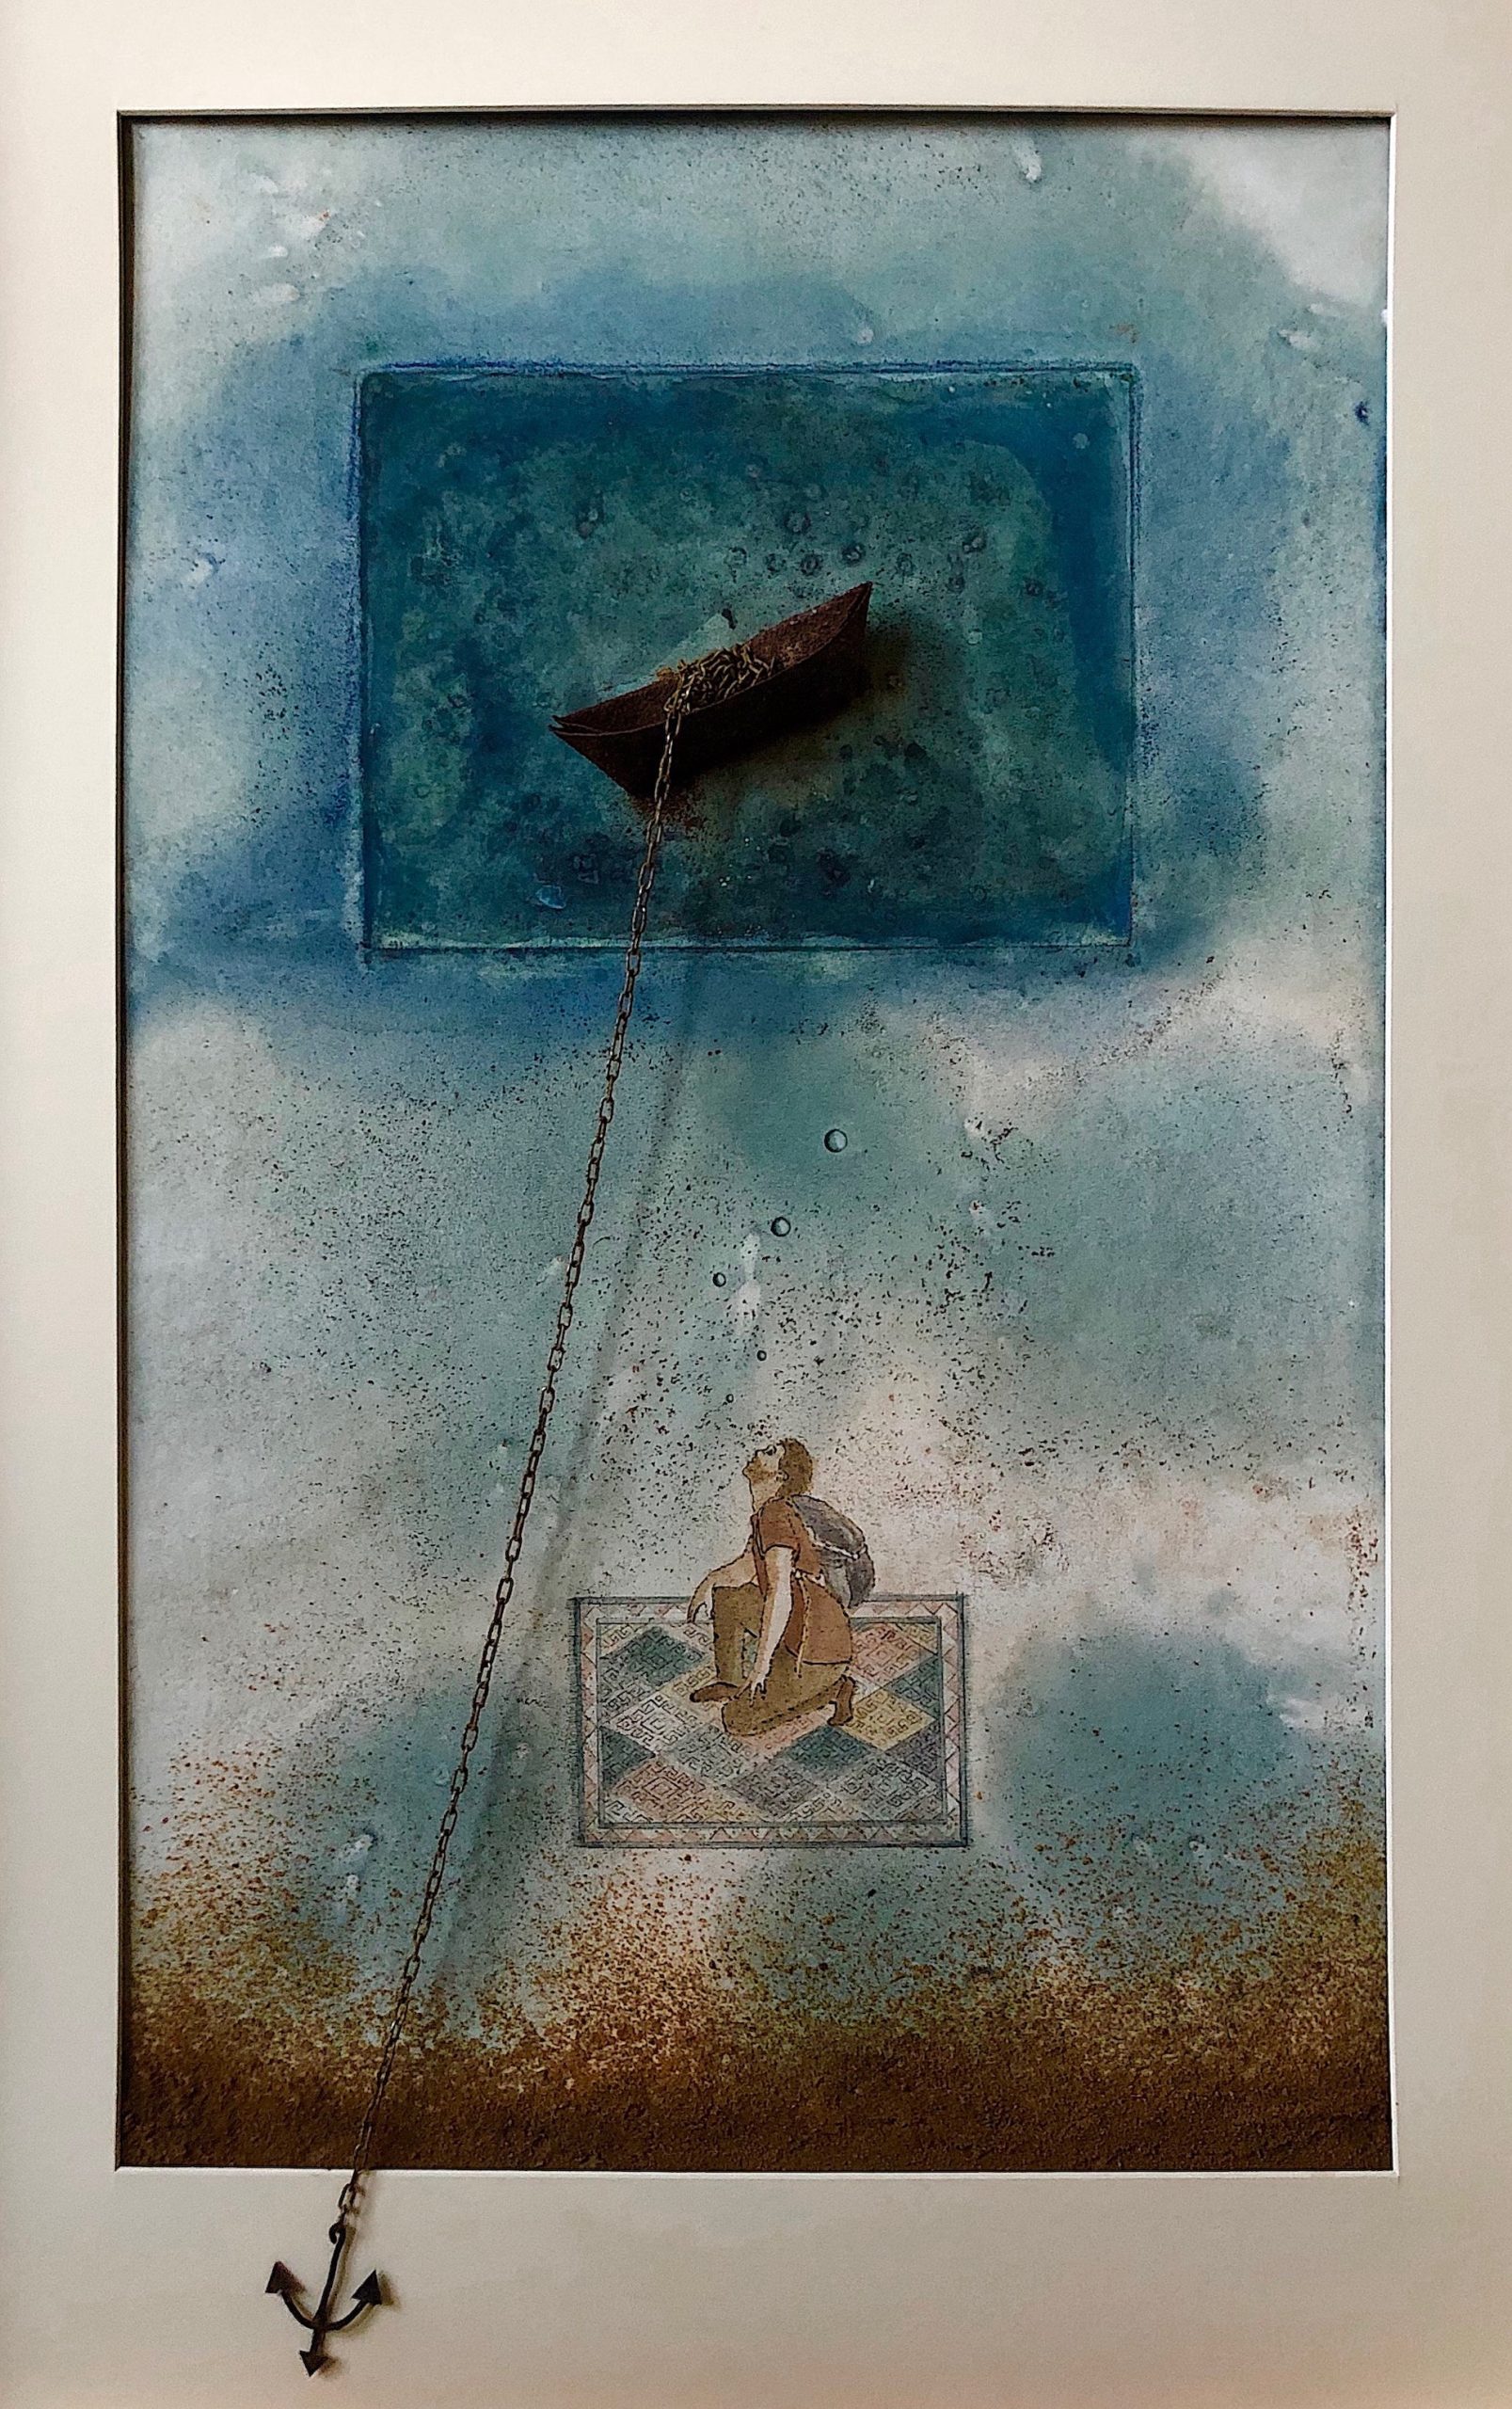 Drowning, 2019, Natural pigment, sand and iron on paper, 50 x 75 cm.